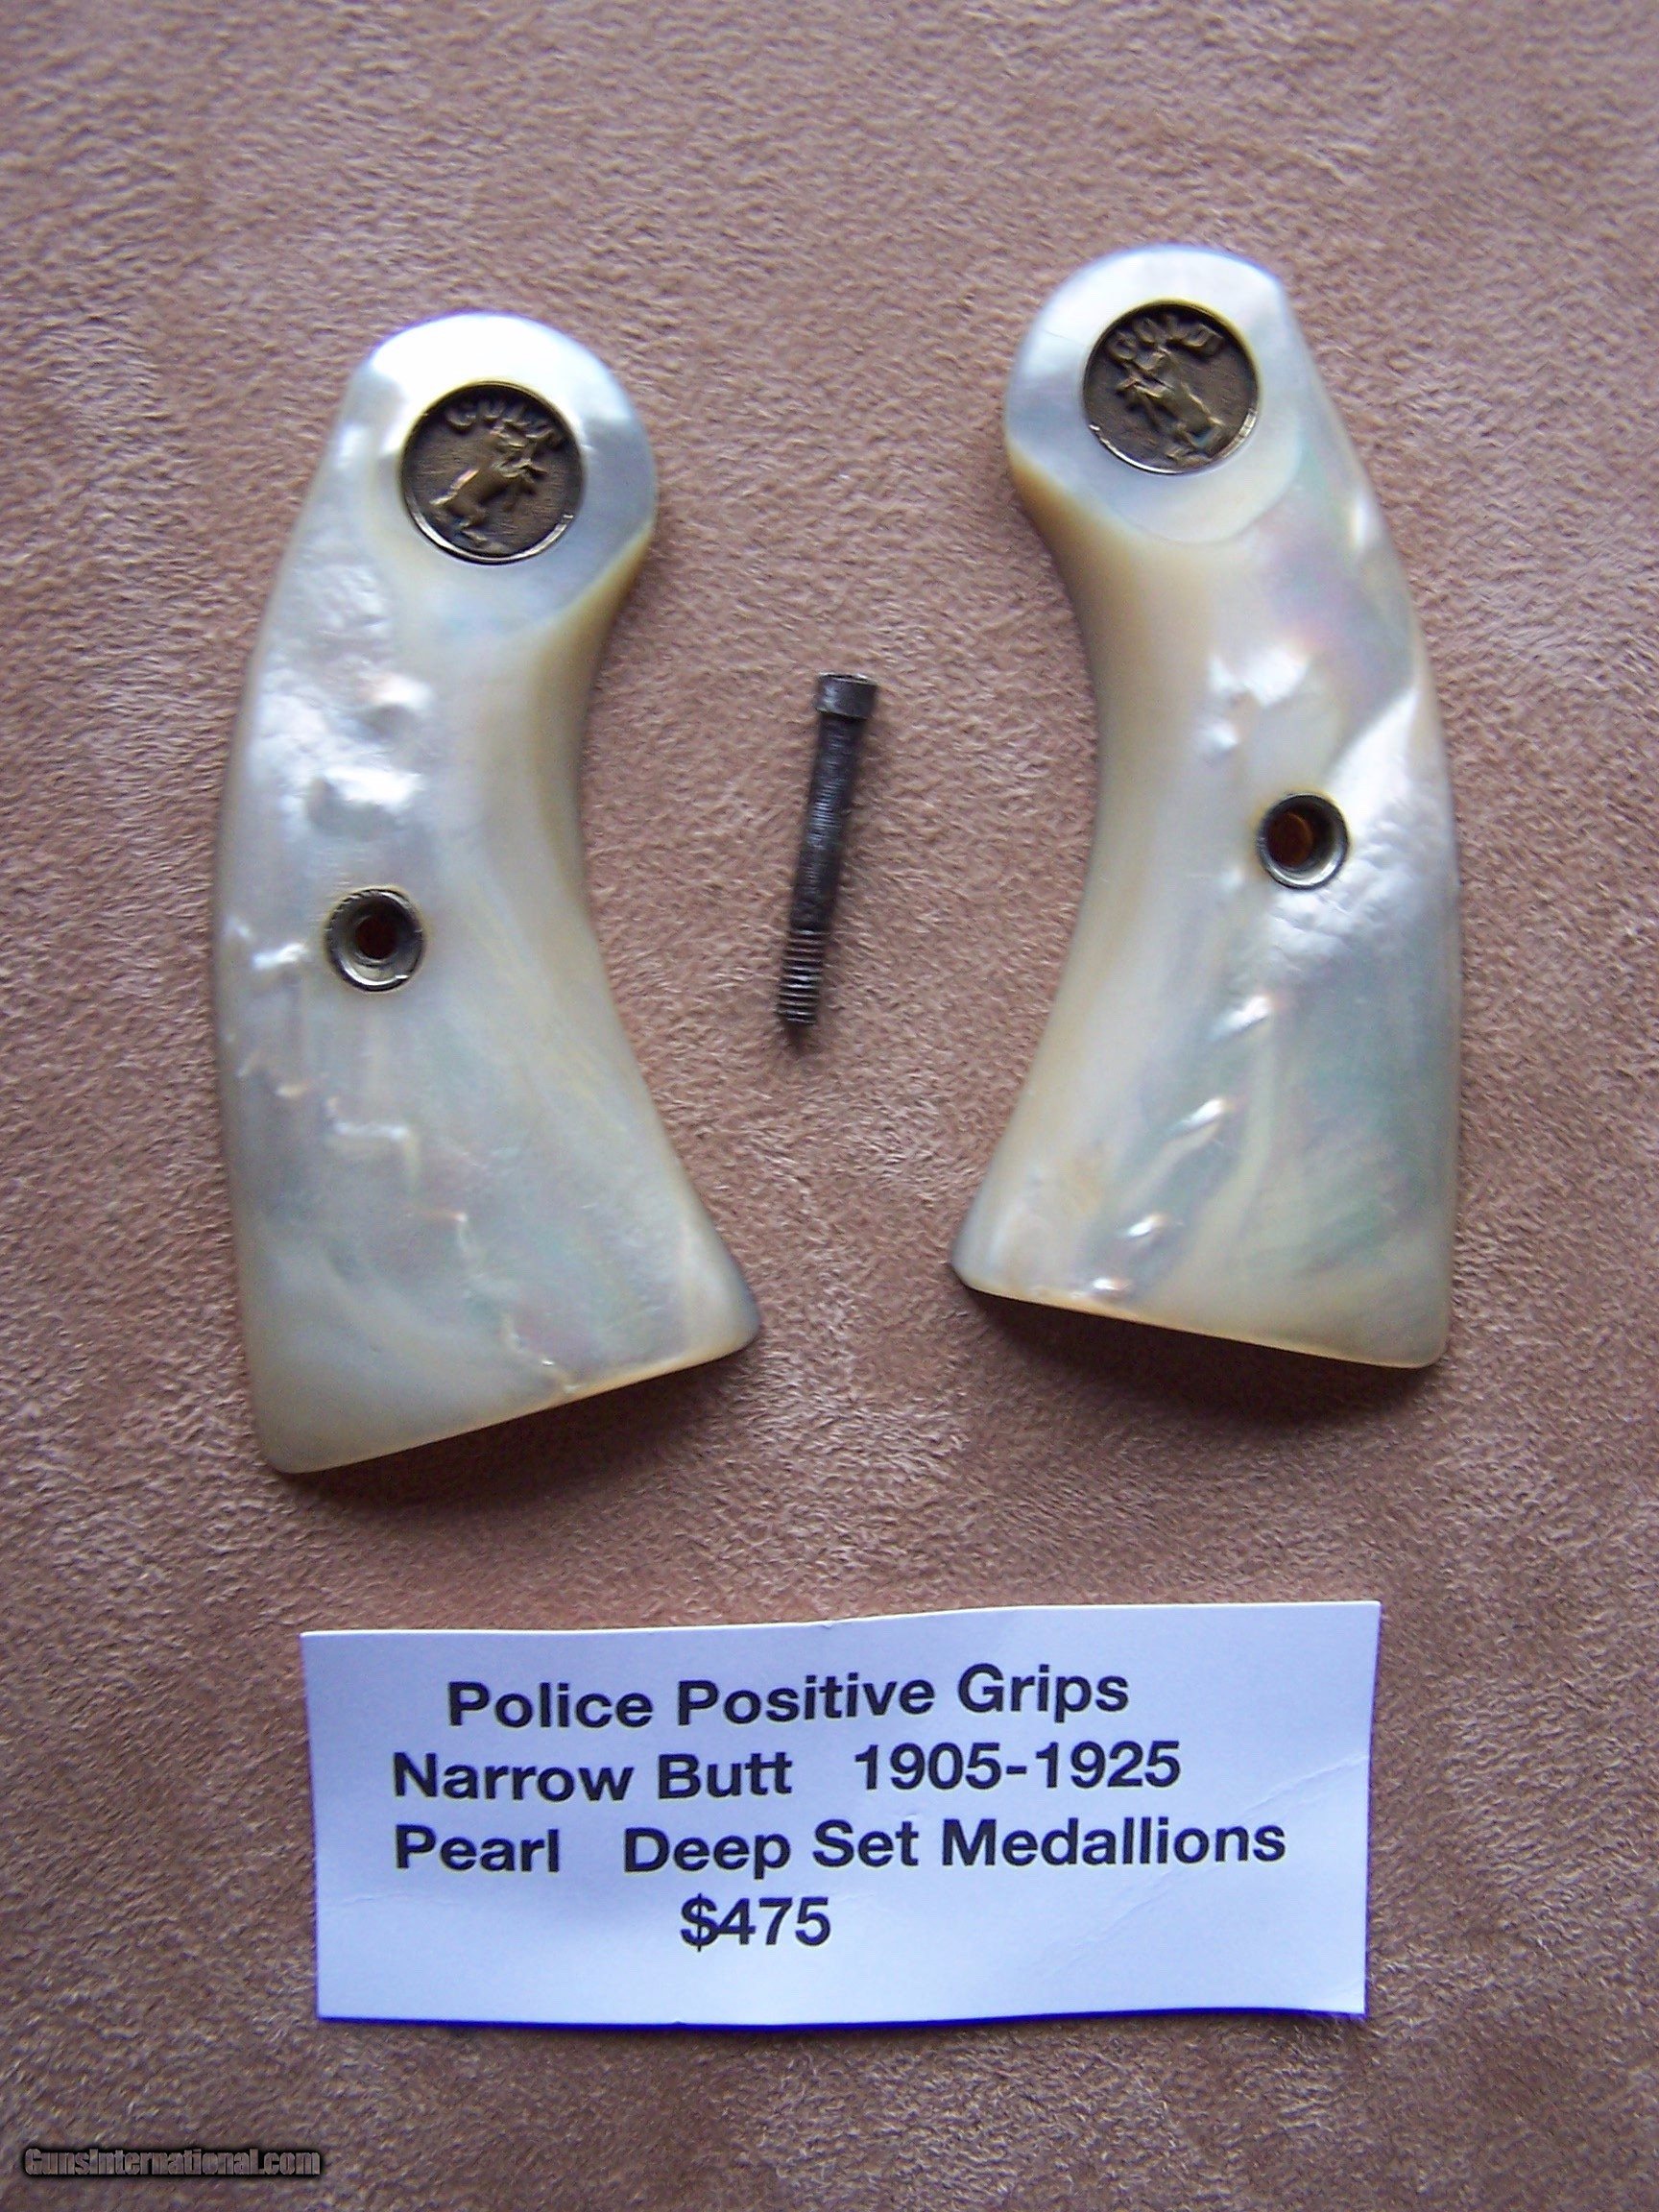 Original Colt Police Positive Pearl Grips With Medallions 5435